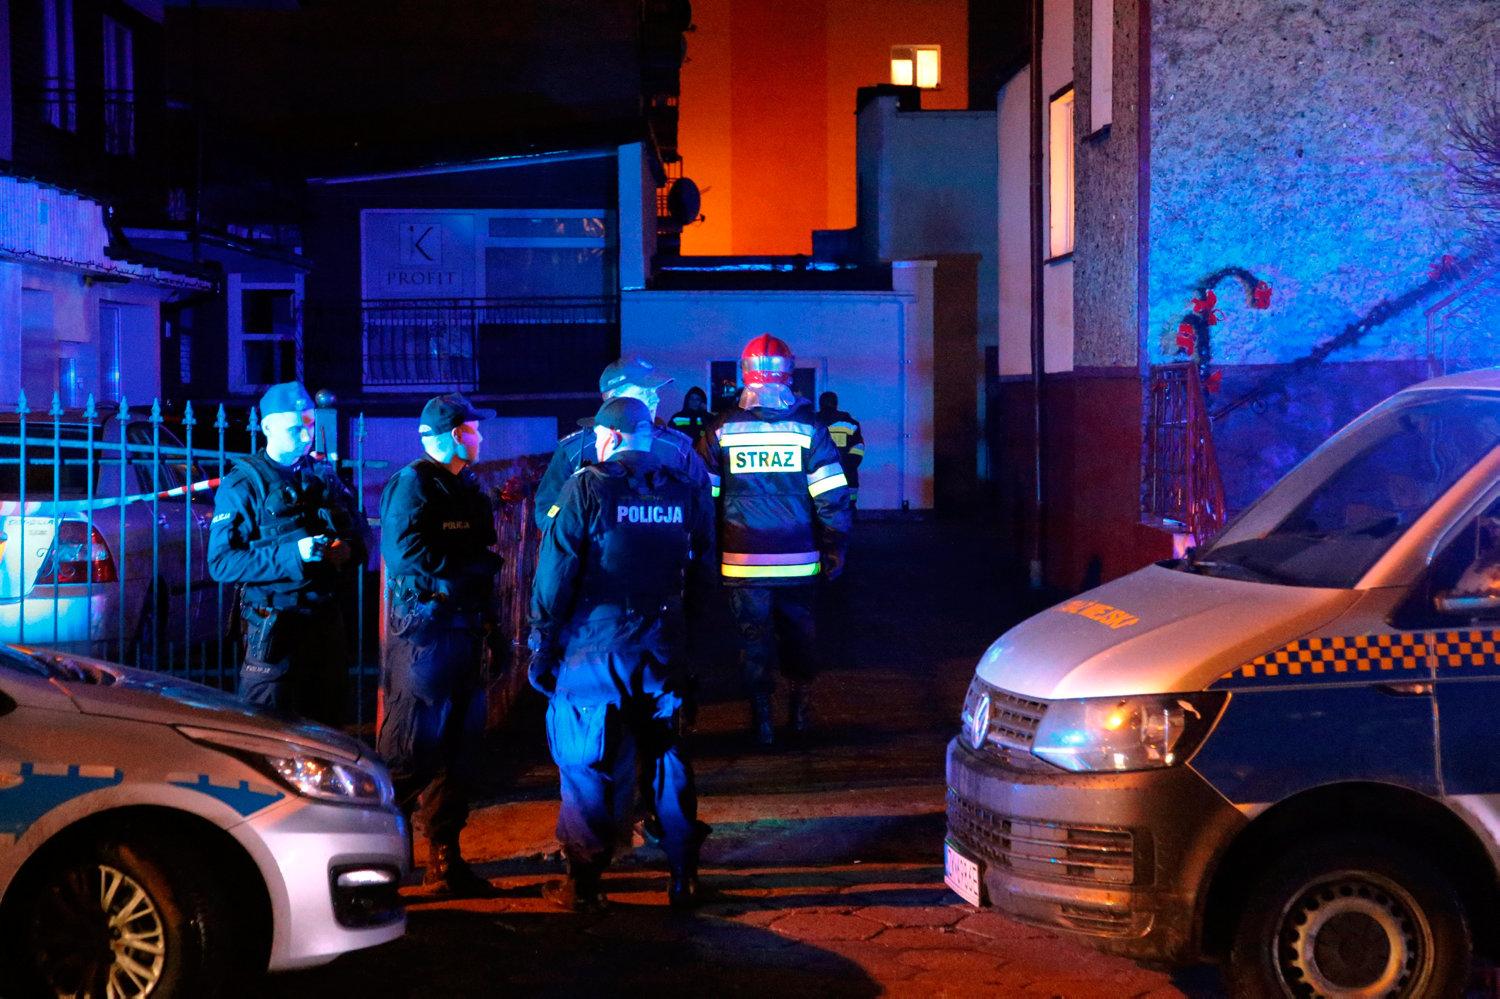 Police officers and fire fighters are seen at the site of a fire which broke out in an escape room in Koszalin, Poland January 4, 2019. Picture taken January 4, 2019. Agencja Gazeta/Cezary Aszkielowicz/via REUTERS ATTENTION EDITORS - THIS IMAGE WAS PROVIDED BY A THIRD PARTY. POLAND OUT. NO COMMERCIAL OR EDITORIAL SALES IN POLAND.